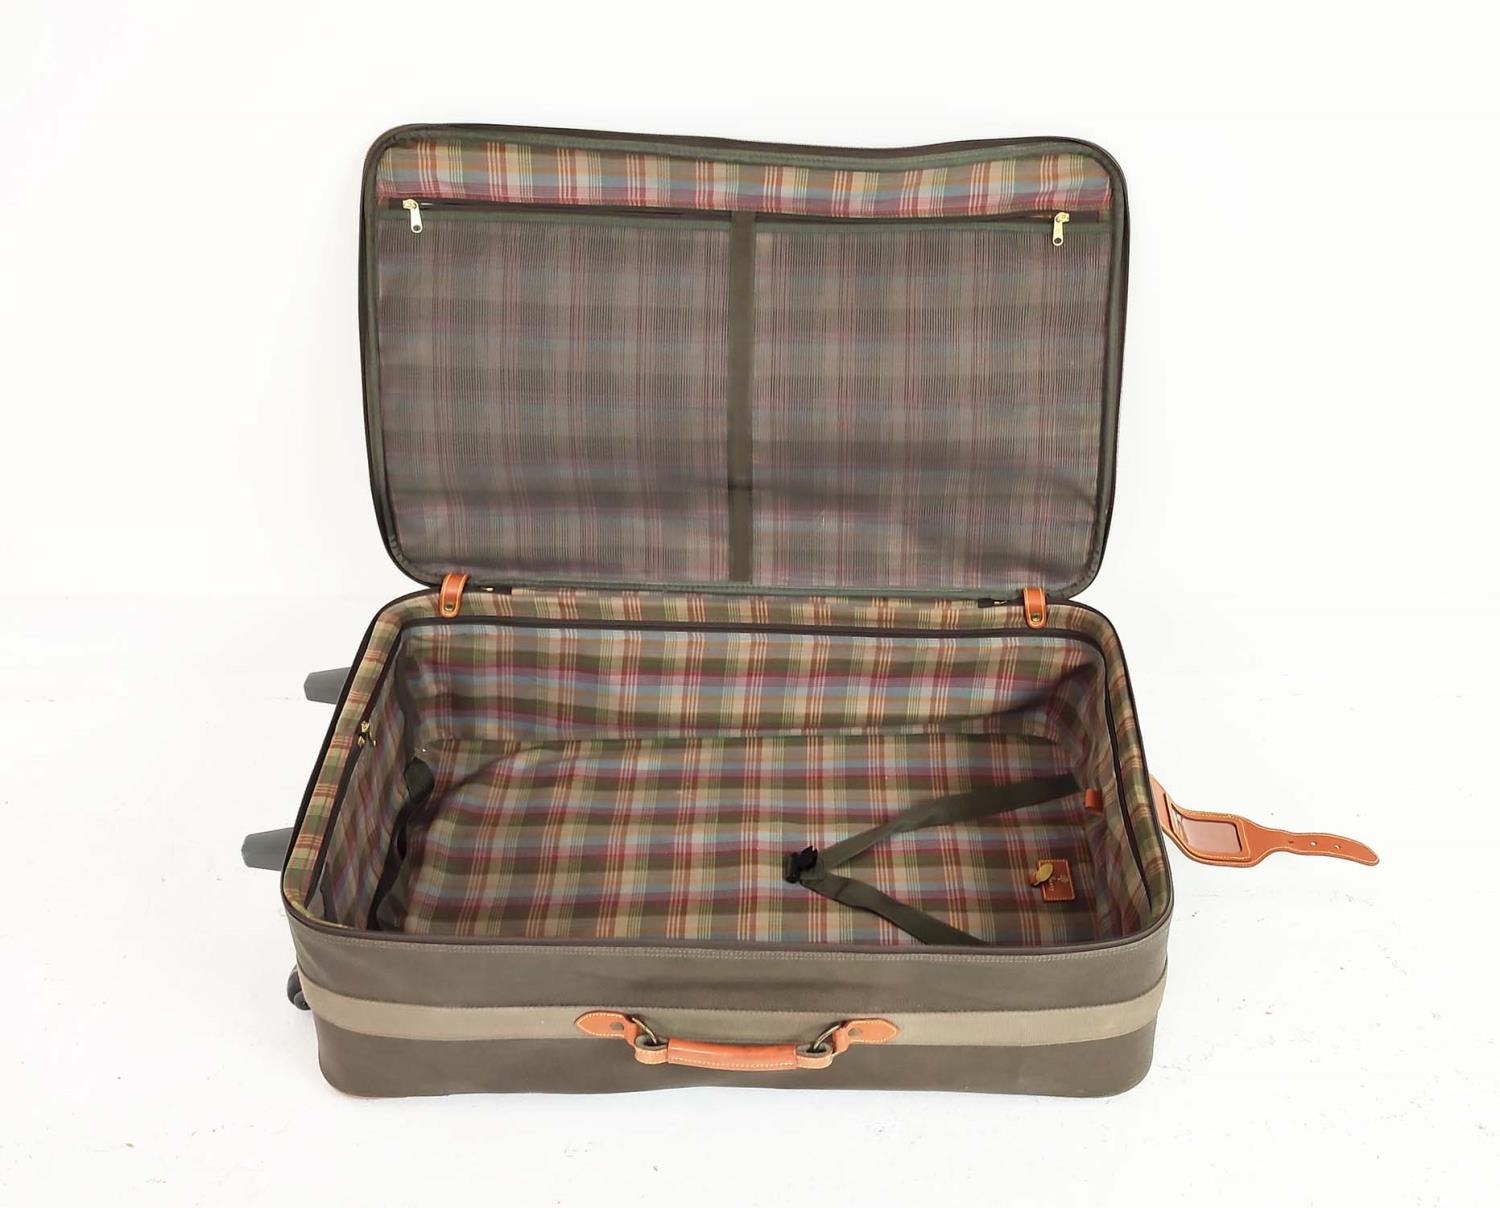 MULBERRY VINTAGE TRAVEL SET, scotchgrain with tan leather trims and handles, two trolleys, one - Image 9 of 11